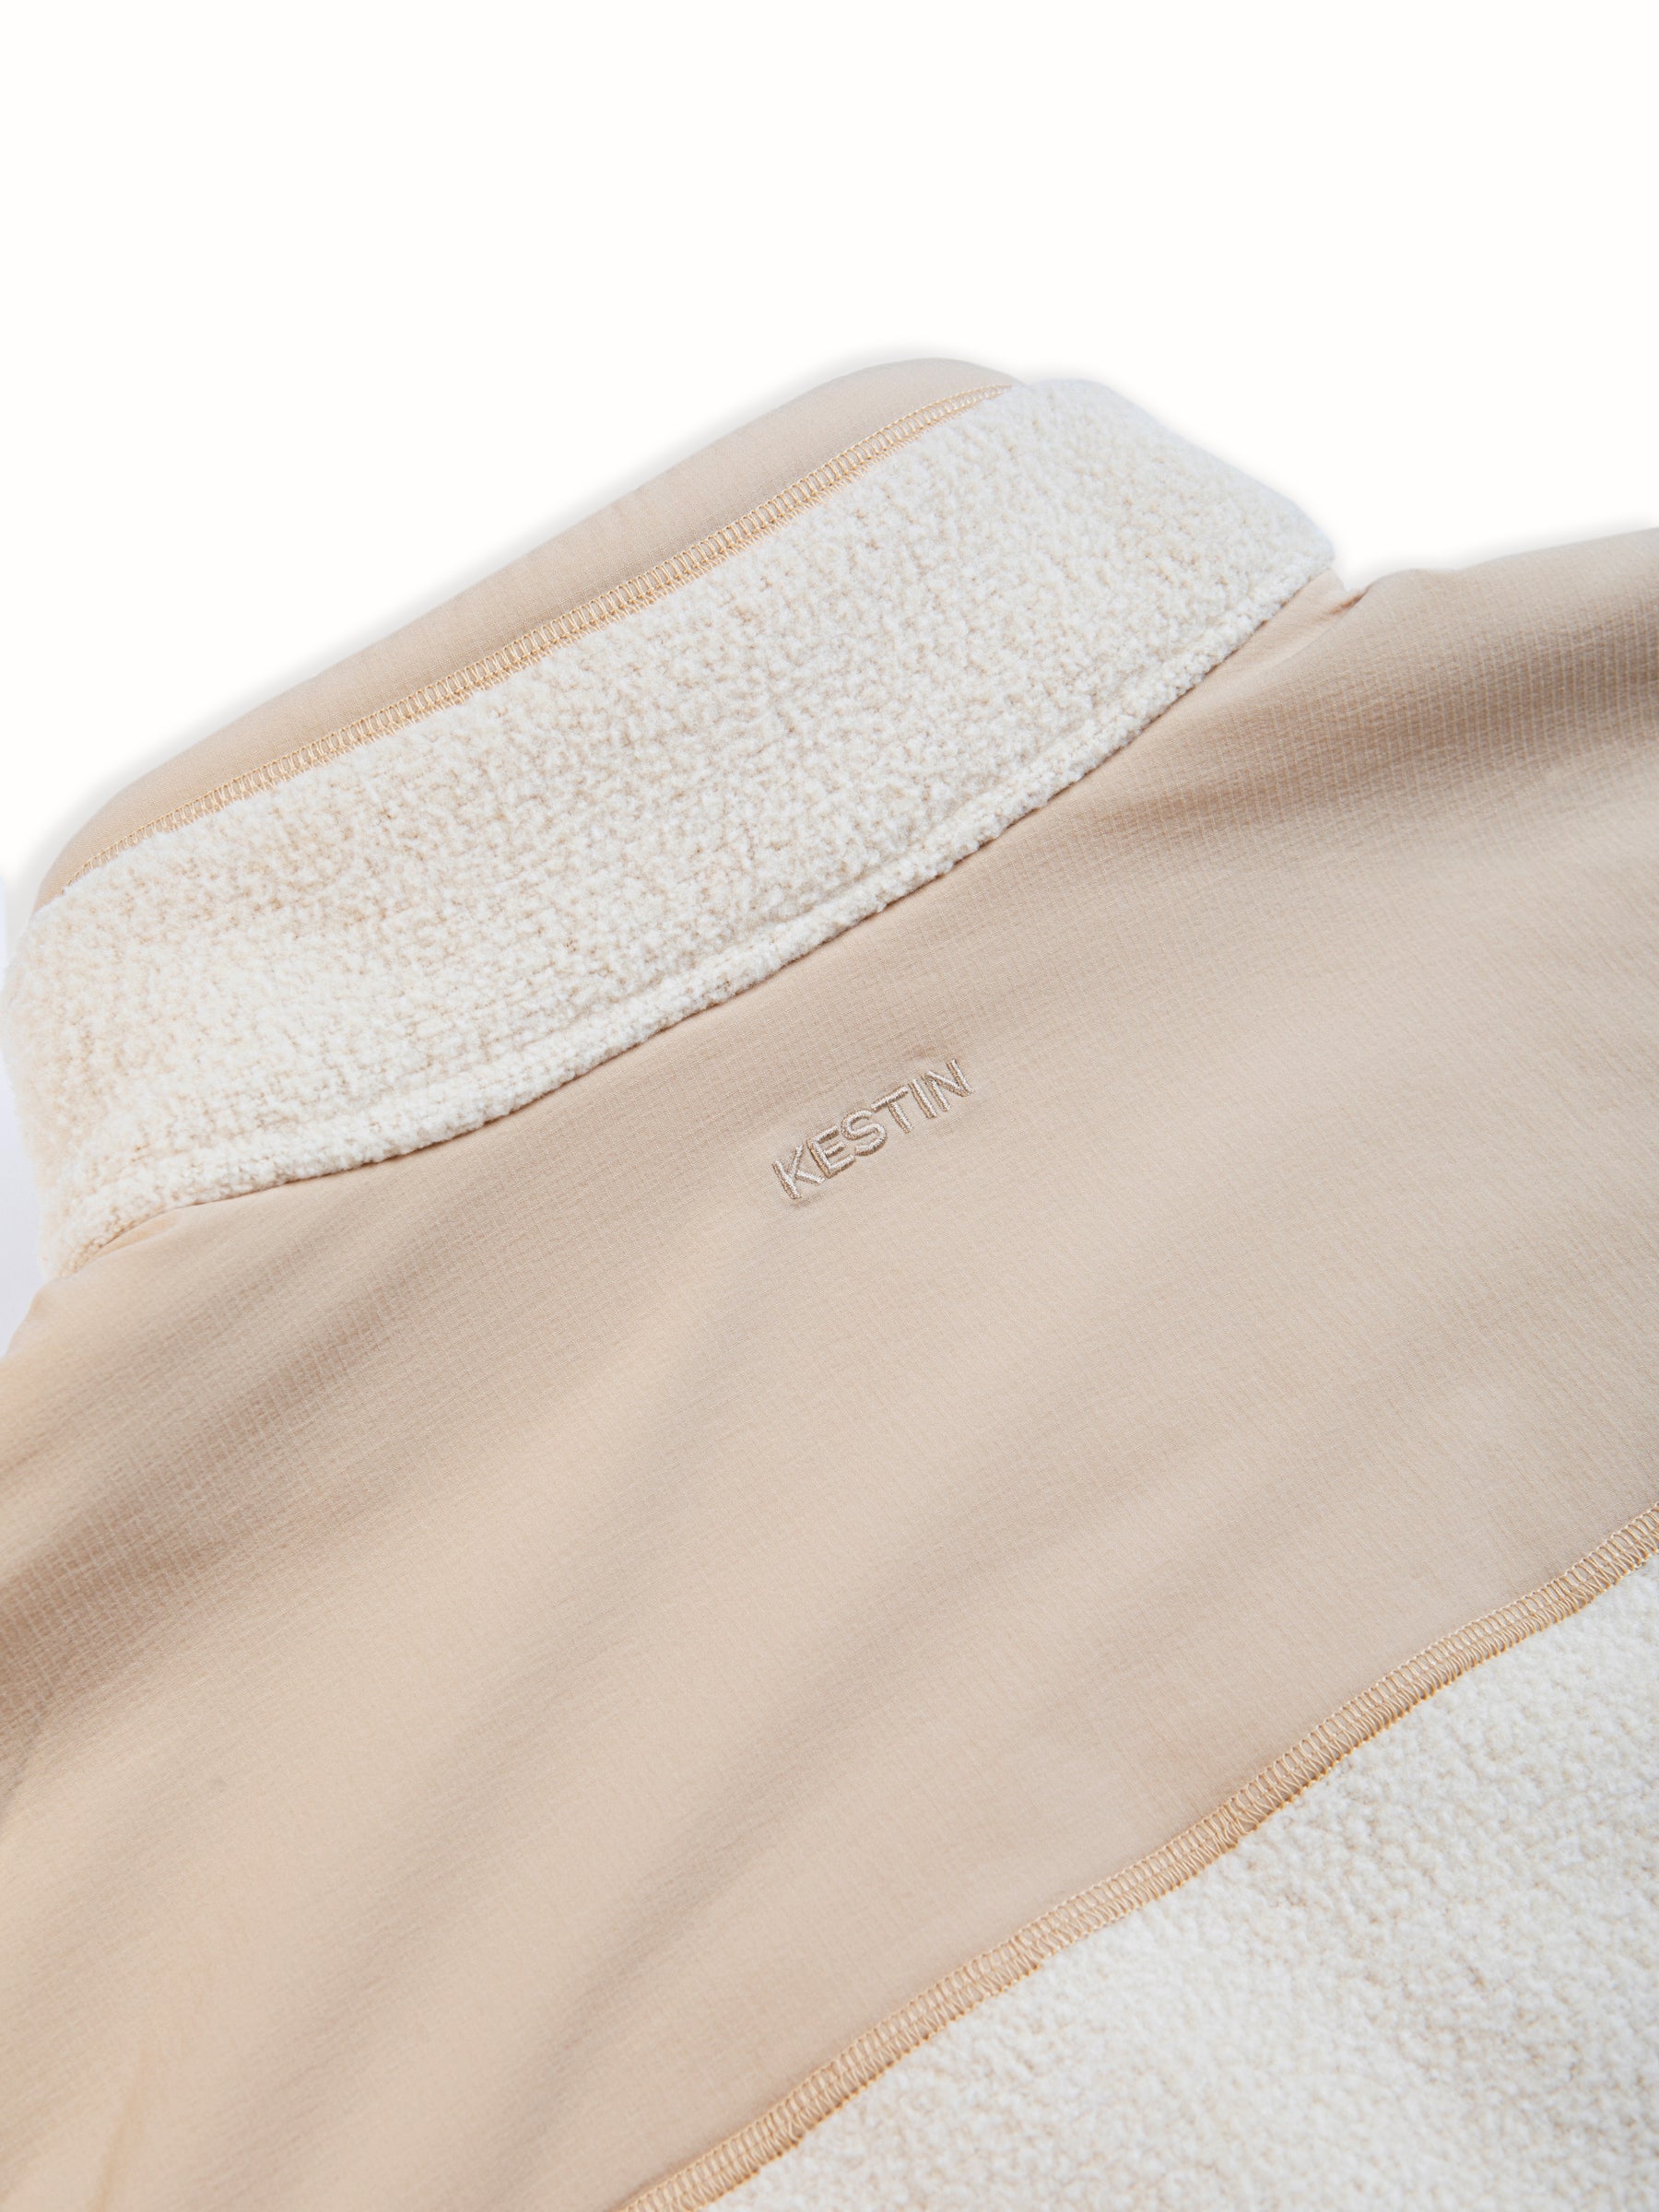 A warm fleece vest with a ripstop back panel in a cream colour.